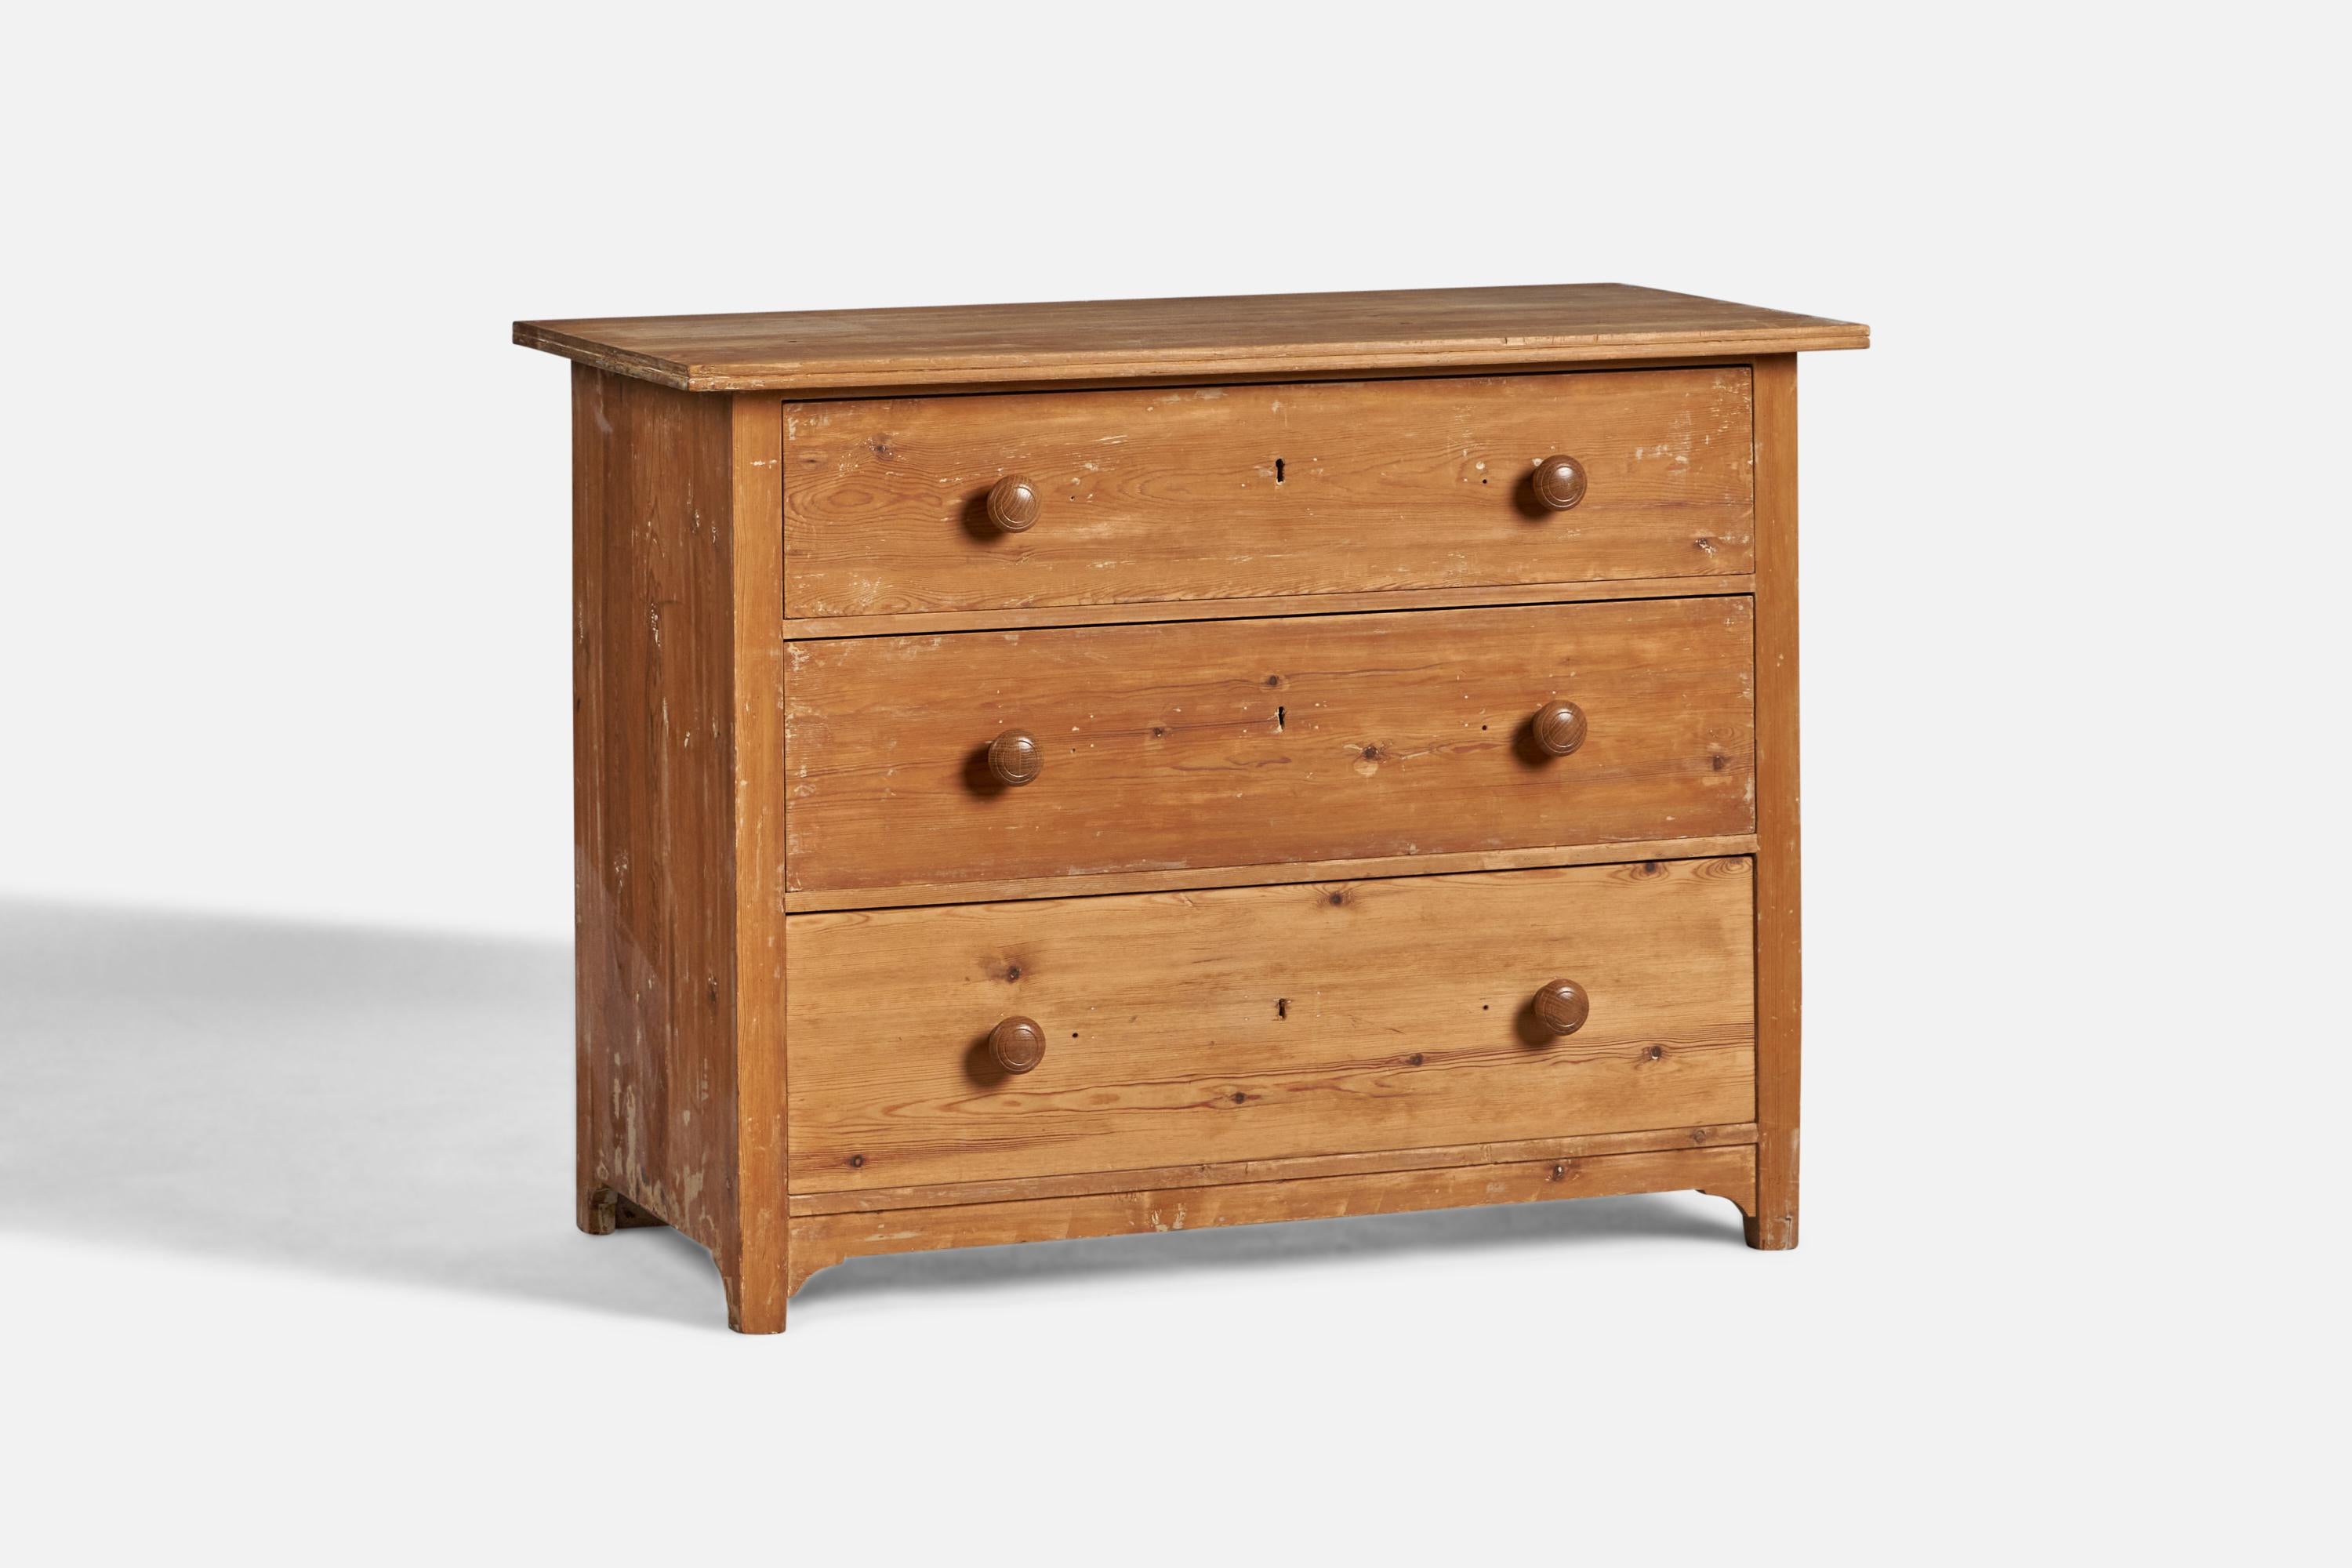 A pine chest of drawers designed and produced in Sweden c. 1900.
